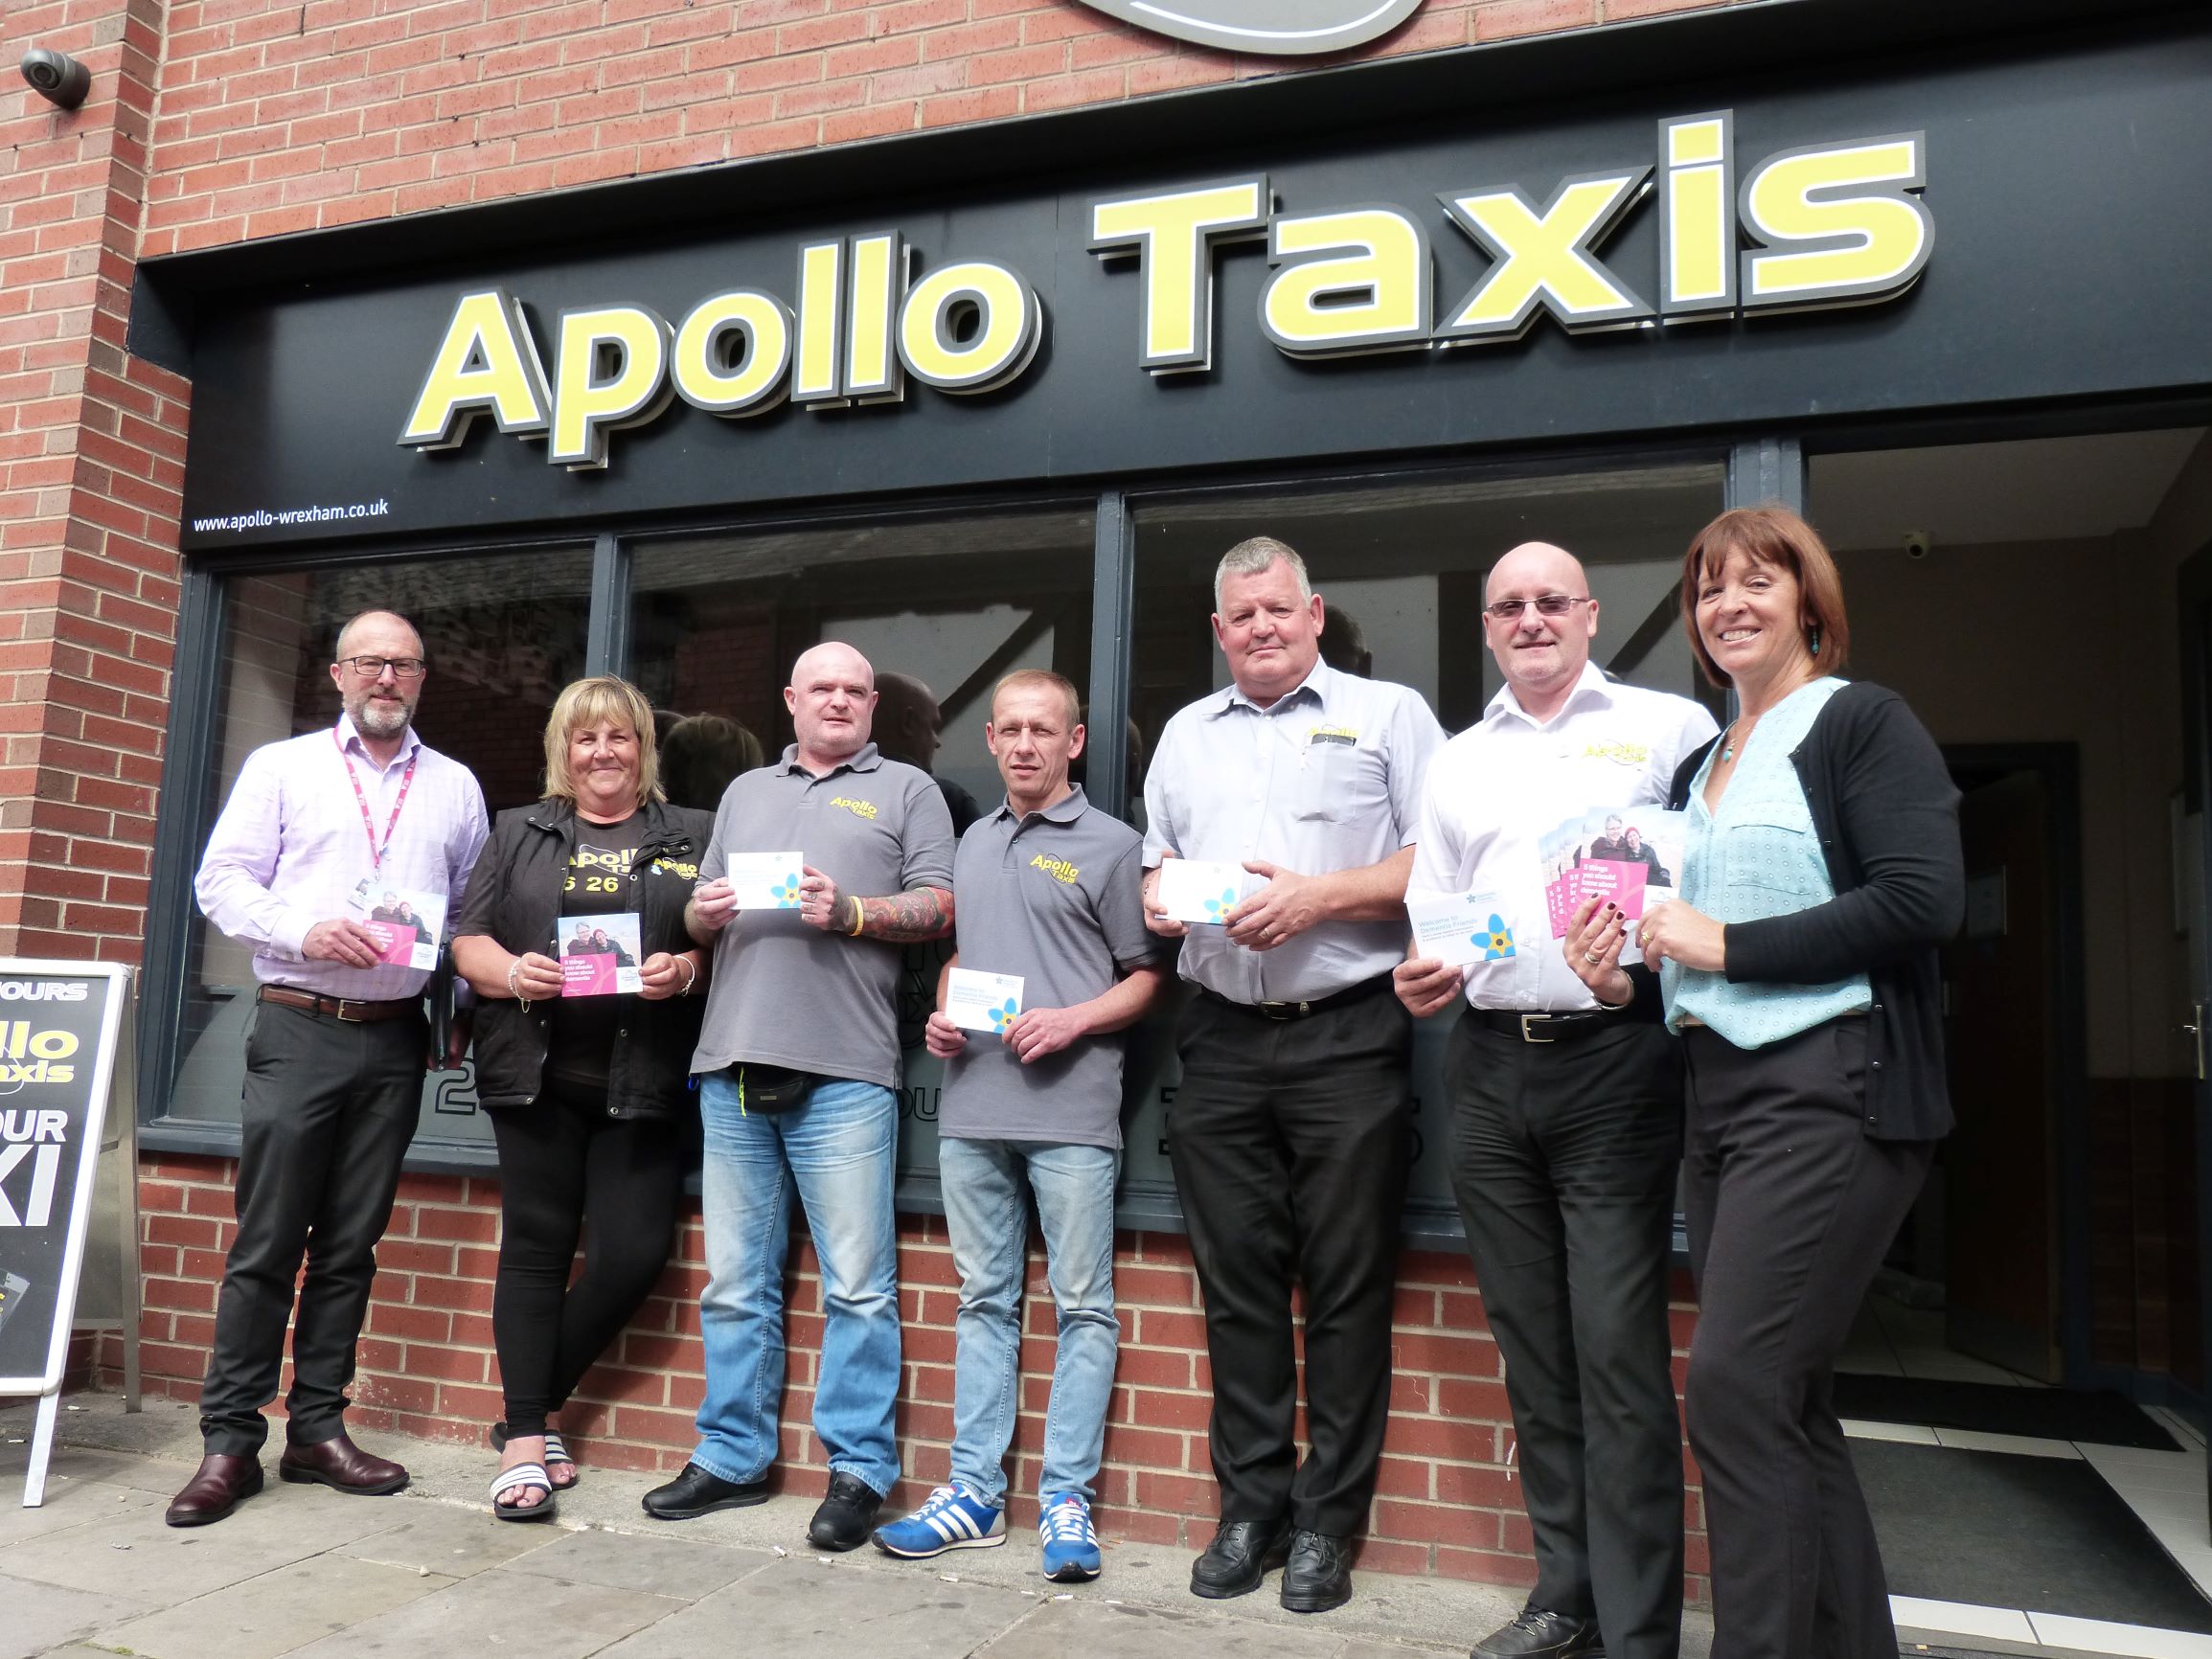 Apollo drivers lead the way with dementia awareness